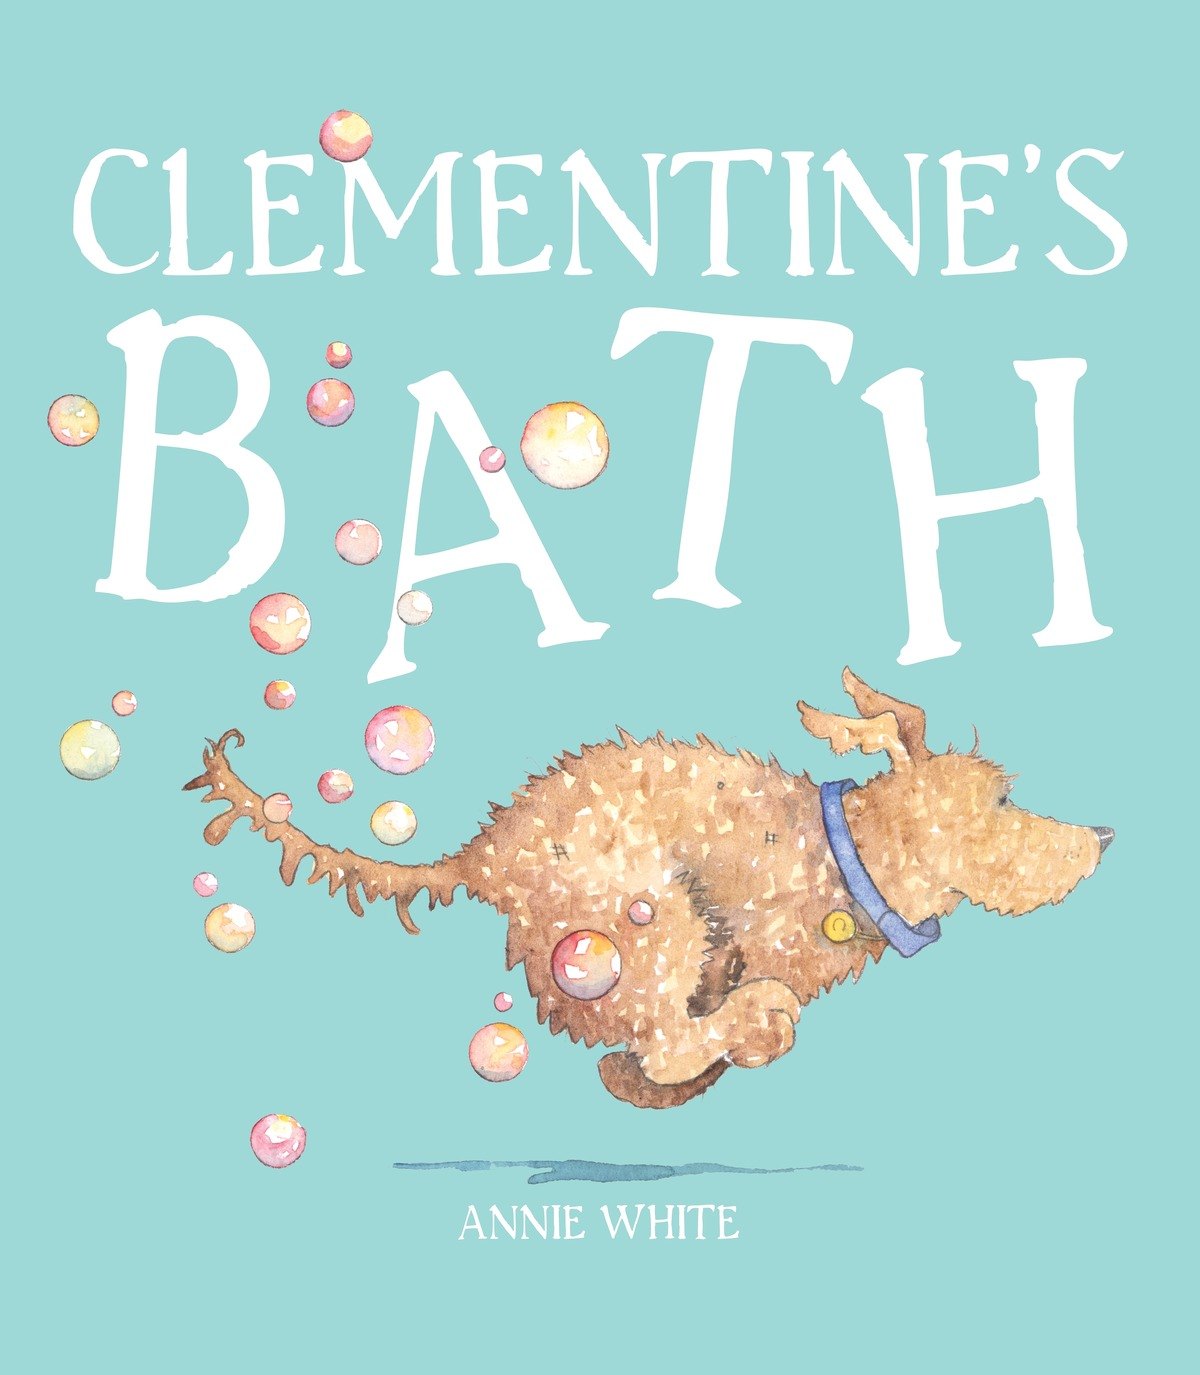 Clementine's Bath by Annie White shortlisted for the Speech Pathology